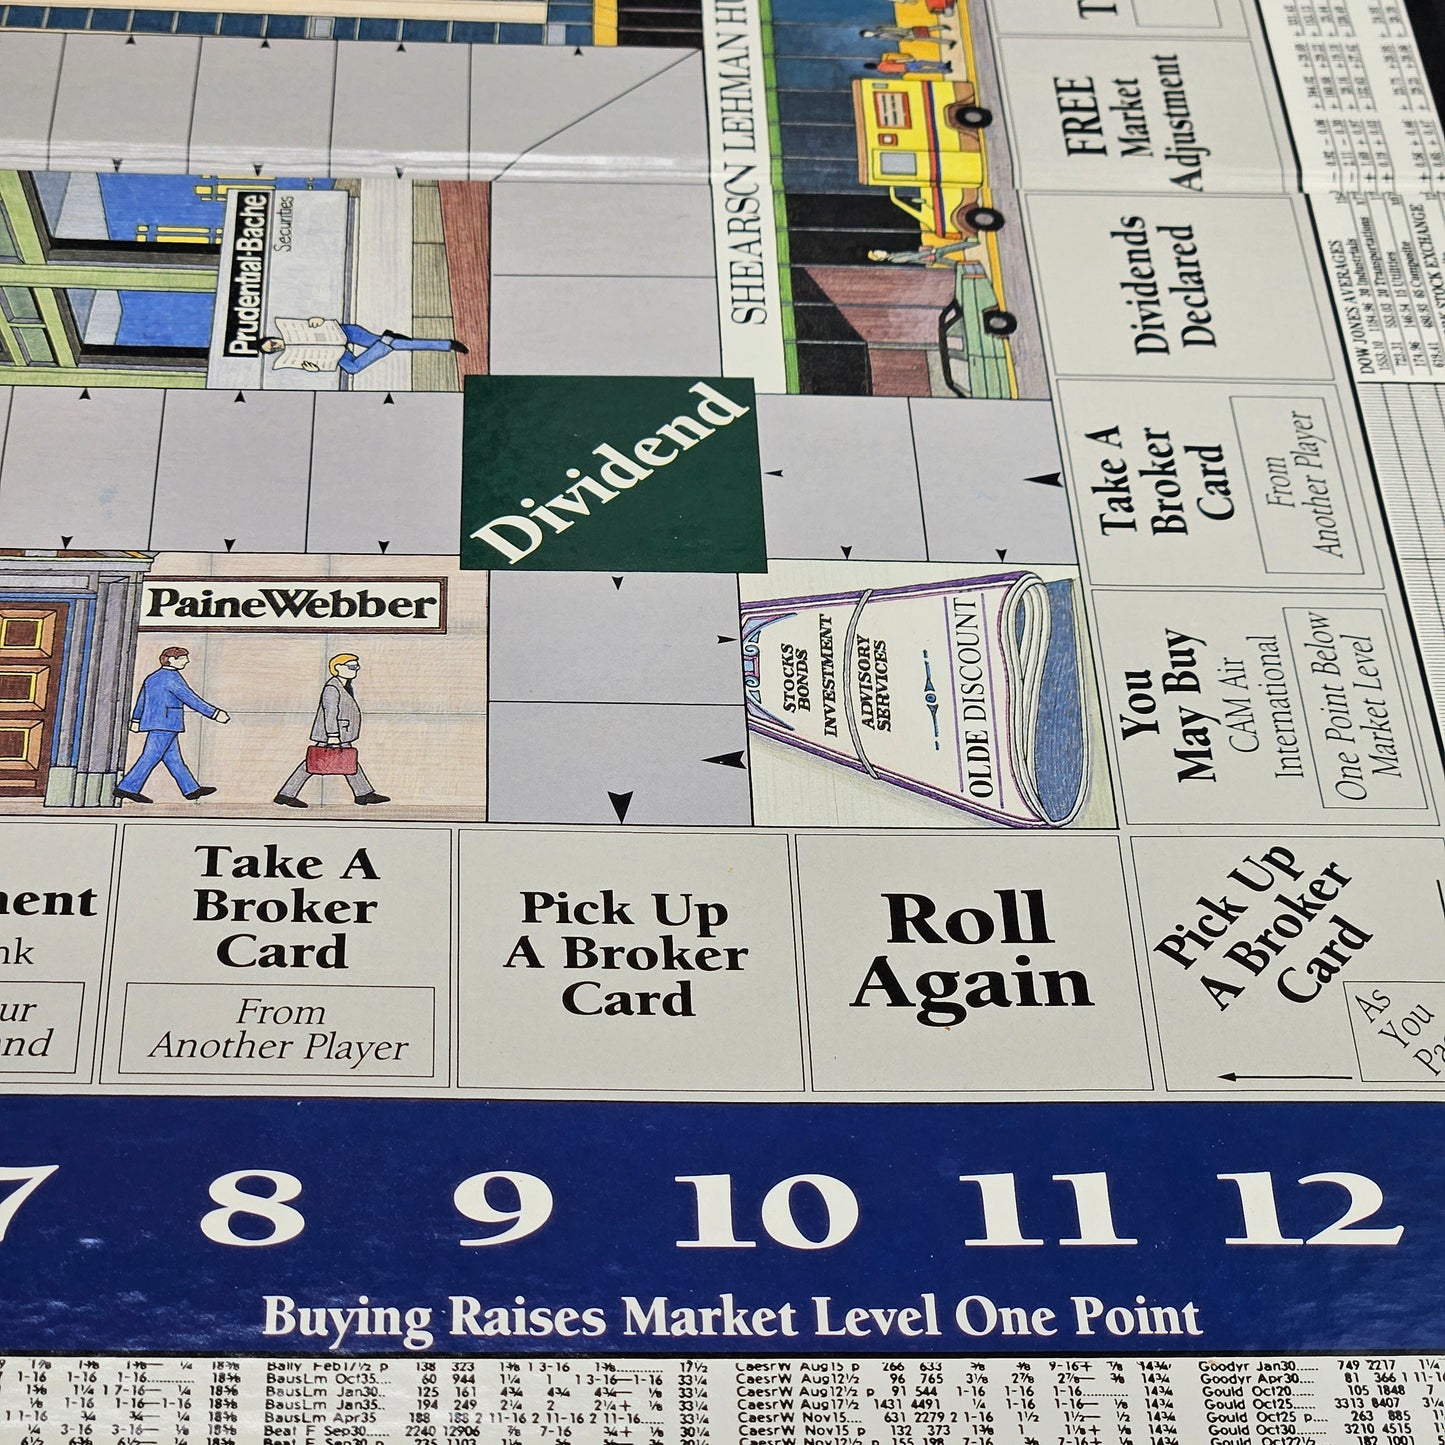 The Wall Street Game from American Game A Board Game Stock Trading